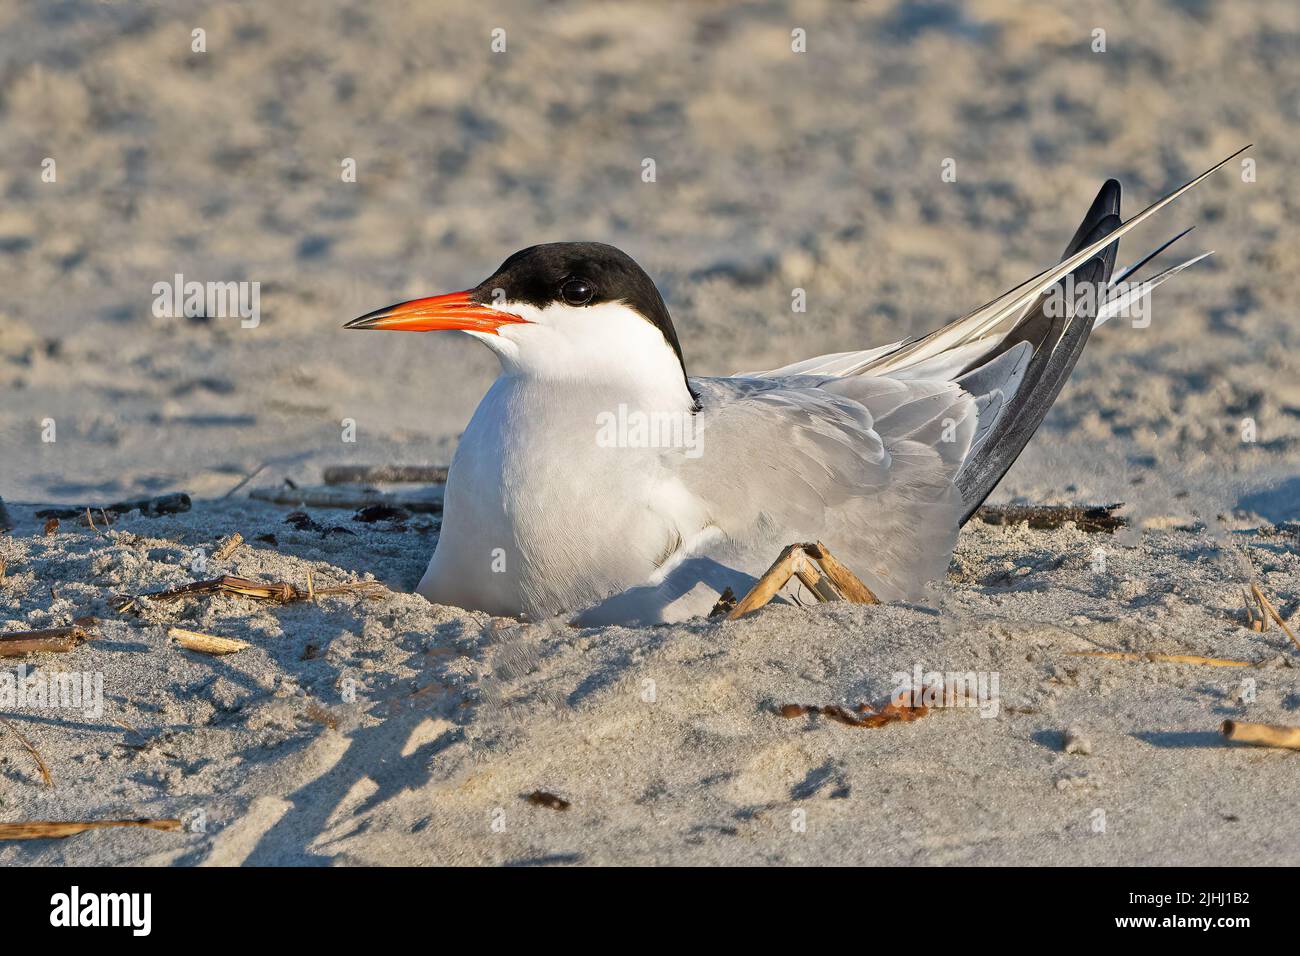 A Common Tern On Eggs in Nest Stock Photo